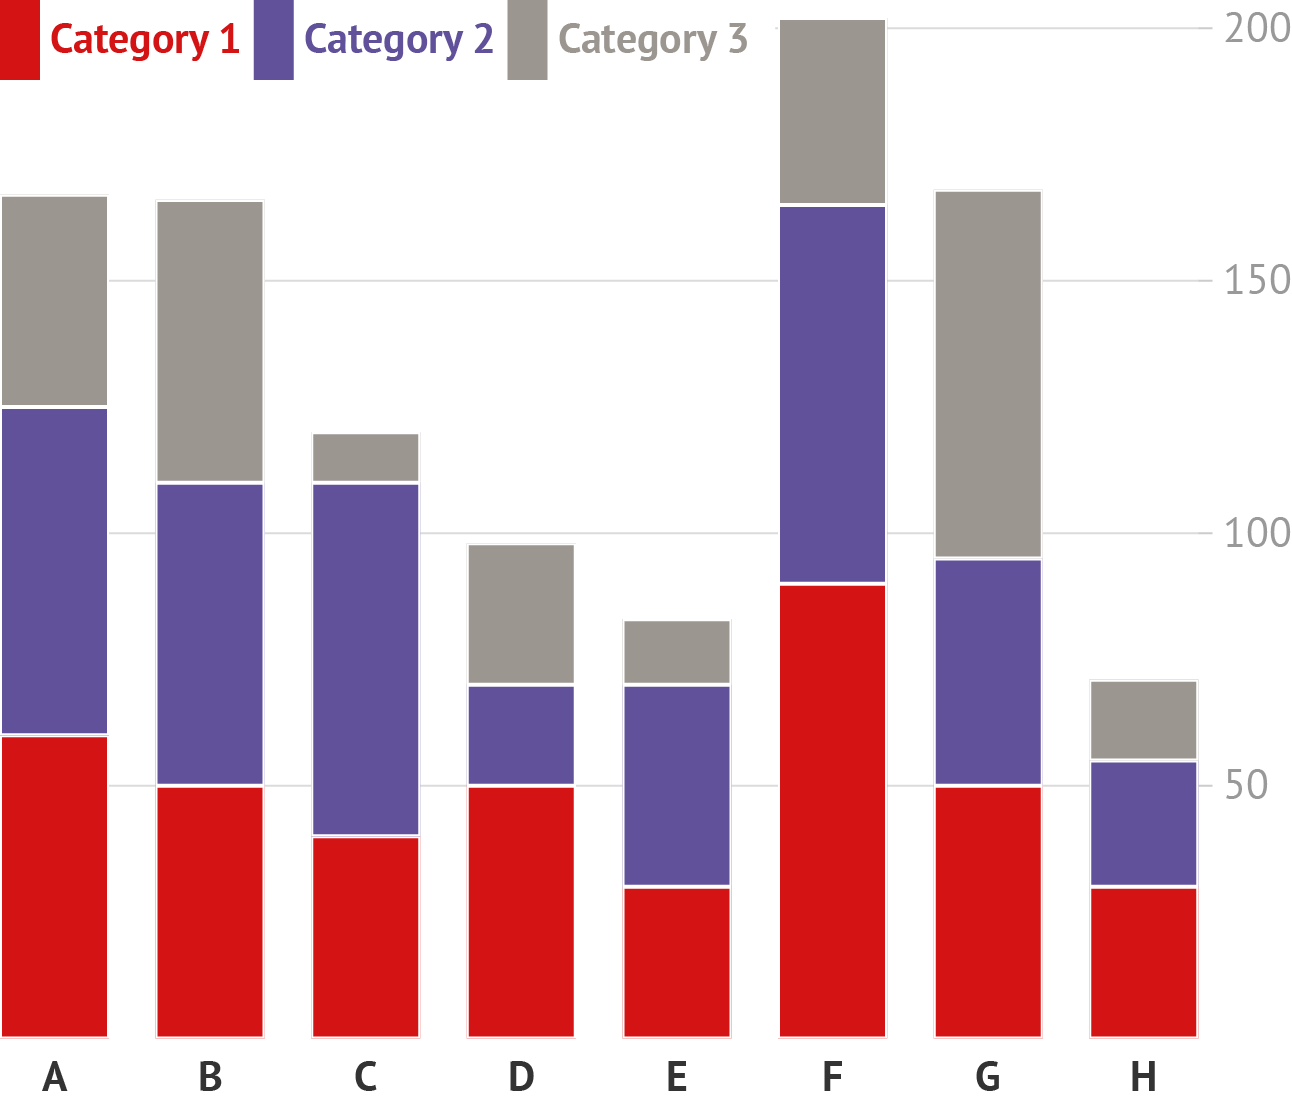 A stacked bar chart with 3 colours (grey, red and purple) representing 3 categories in the data